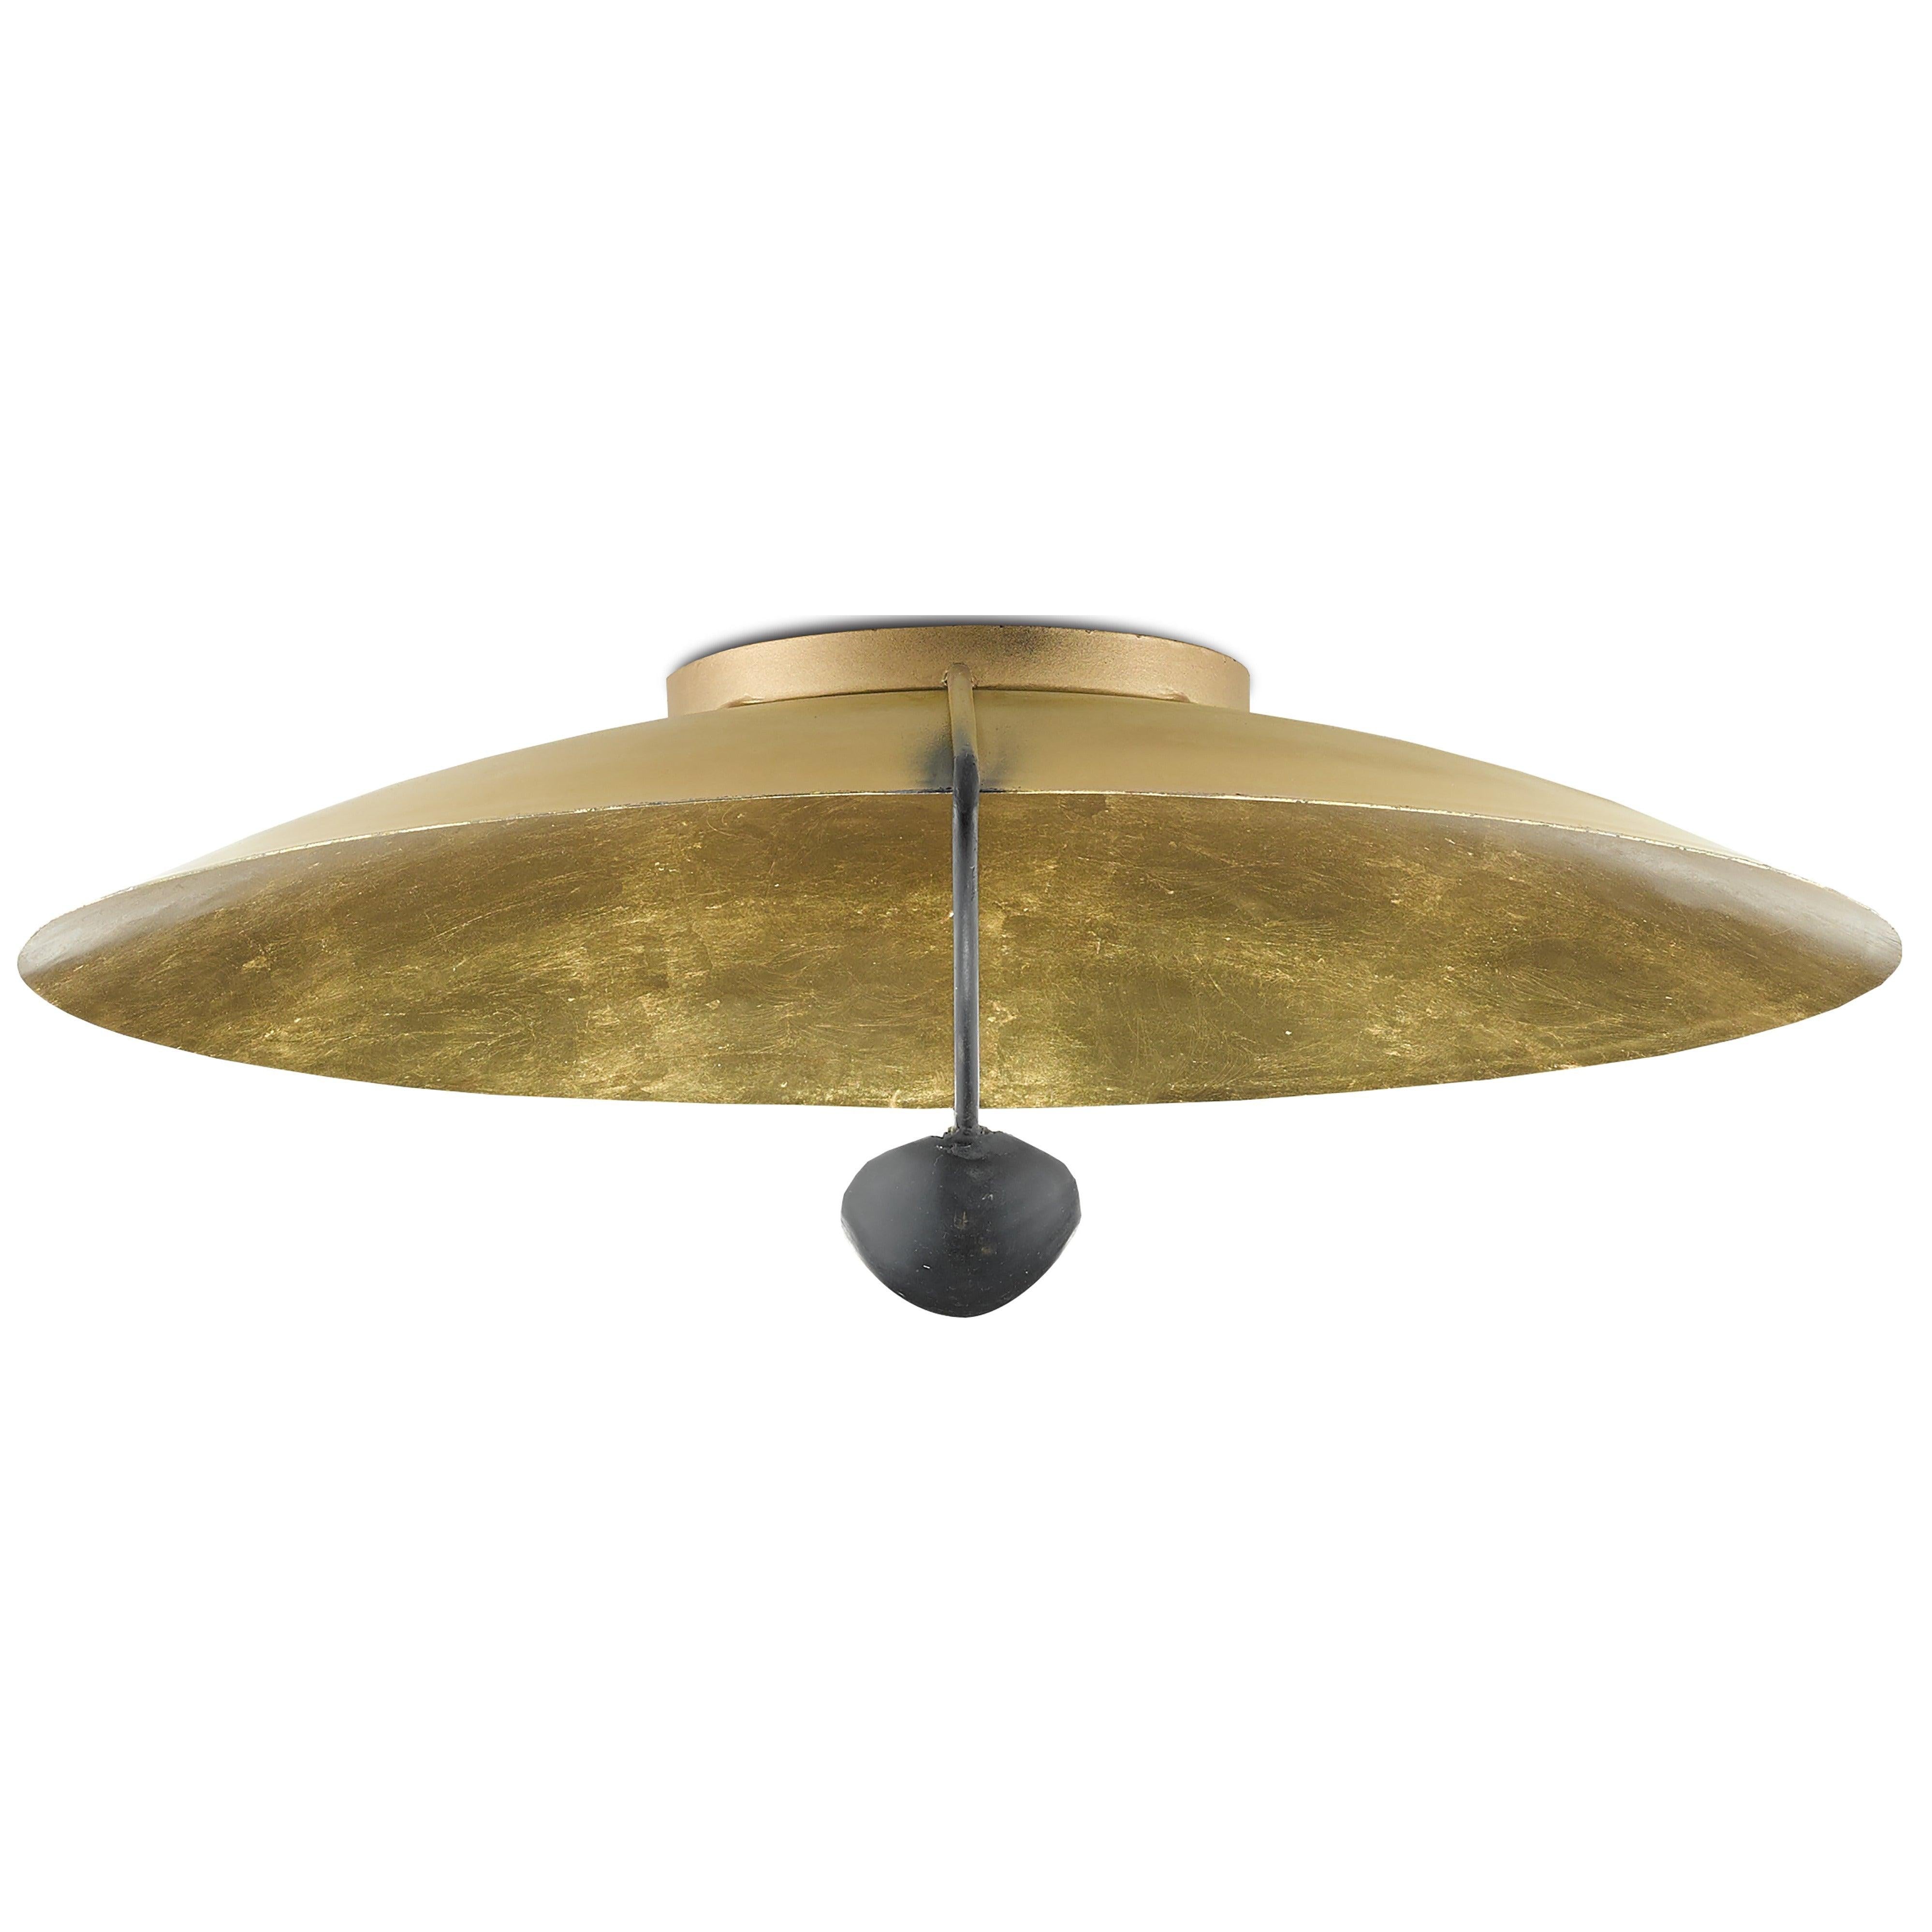 Currey and Company - Pinders Flush Mount - 9999-0049 | Montreal Lighting & Hardware